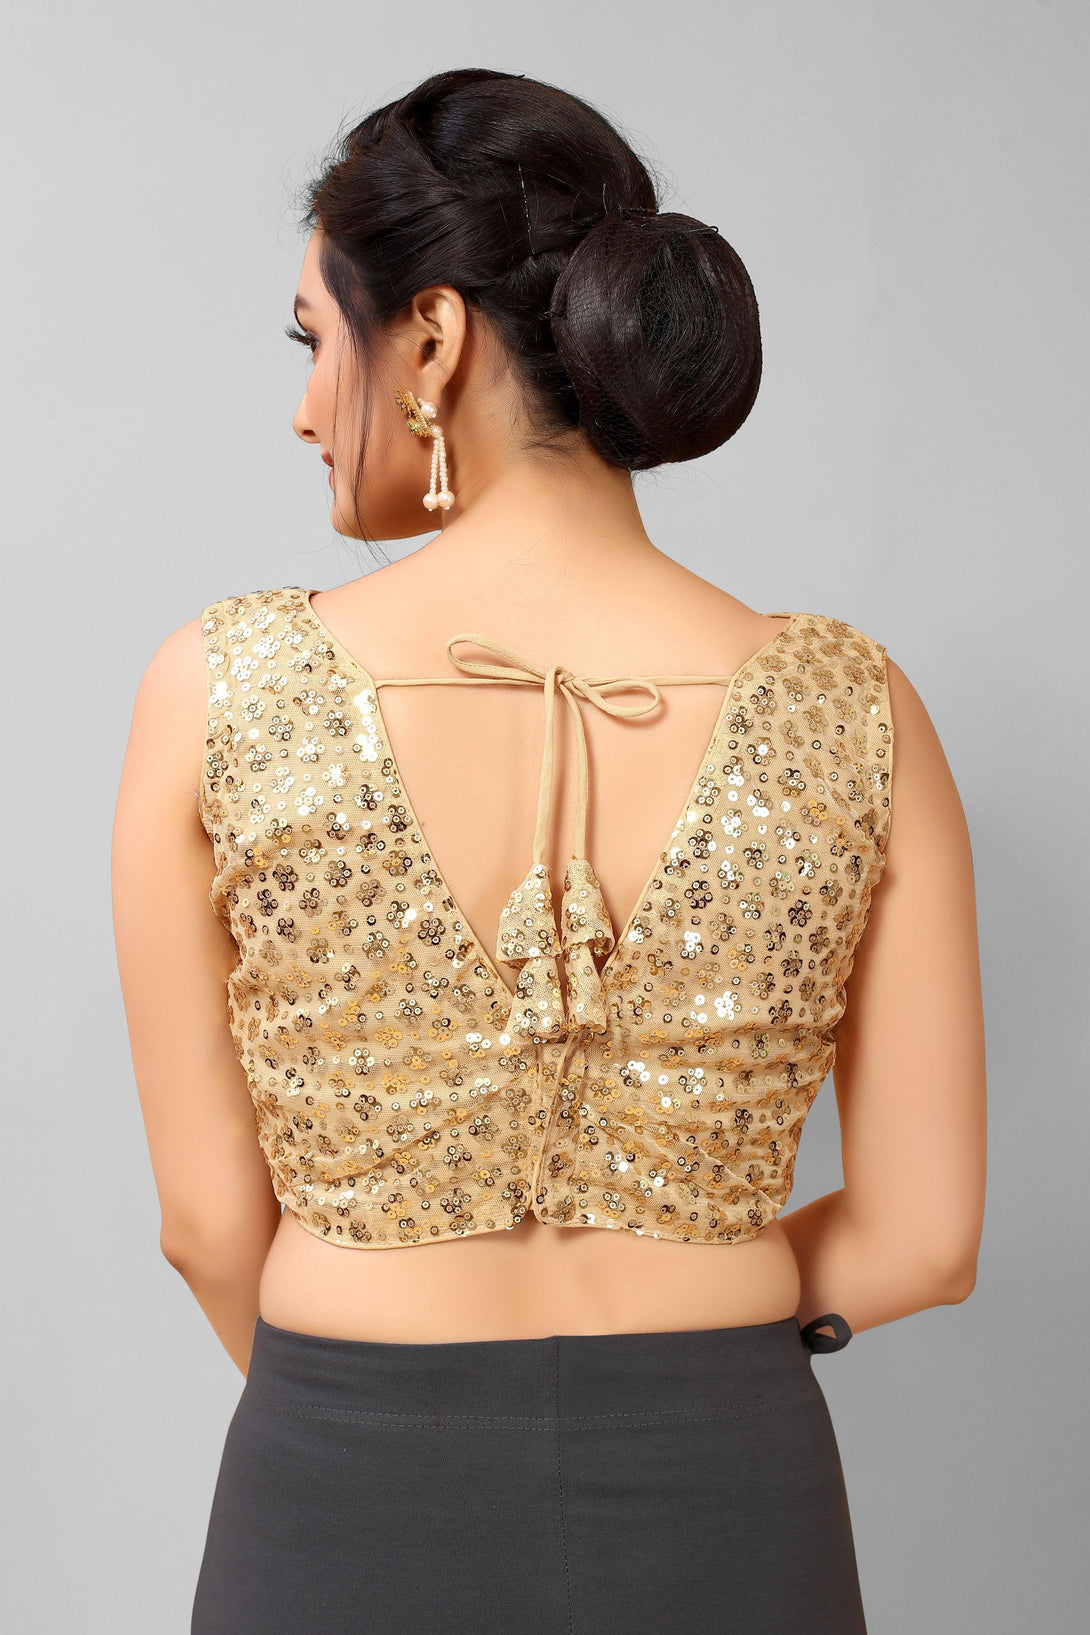 Beige Ready to Wear Net Padded Blouse with Sequins - Indiakreations